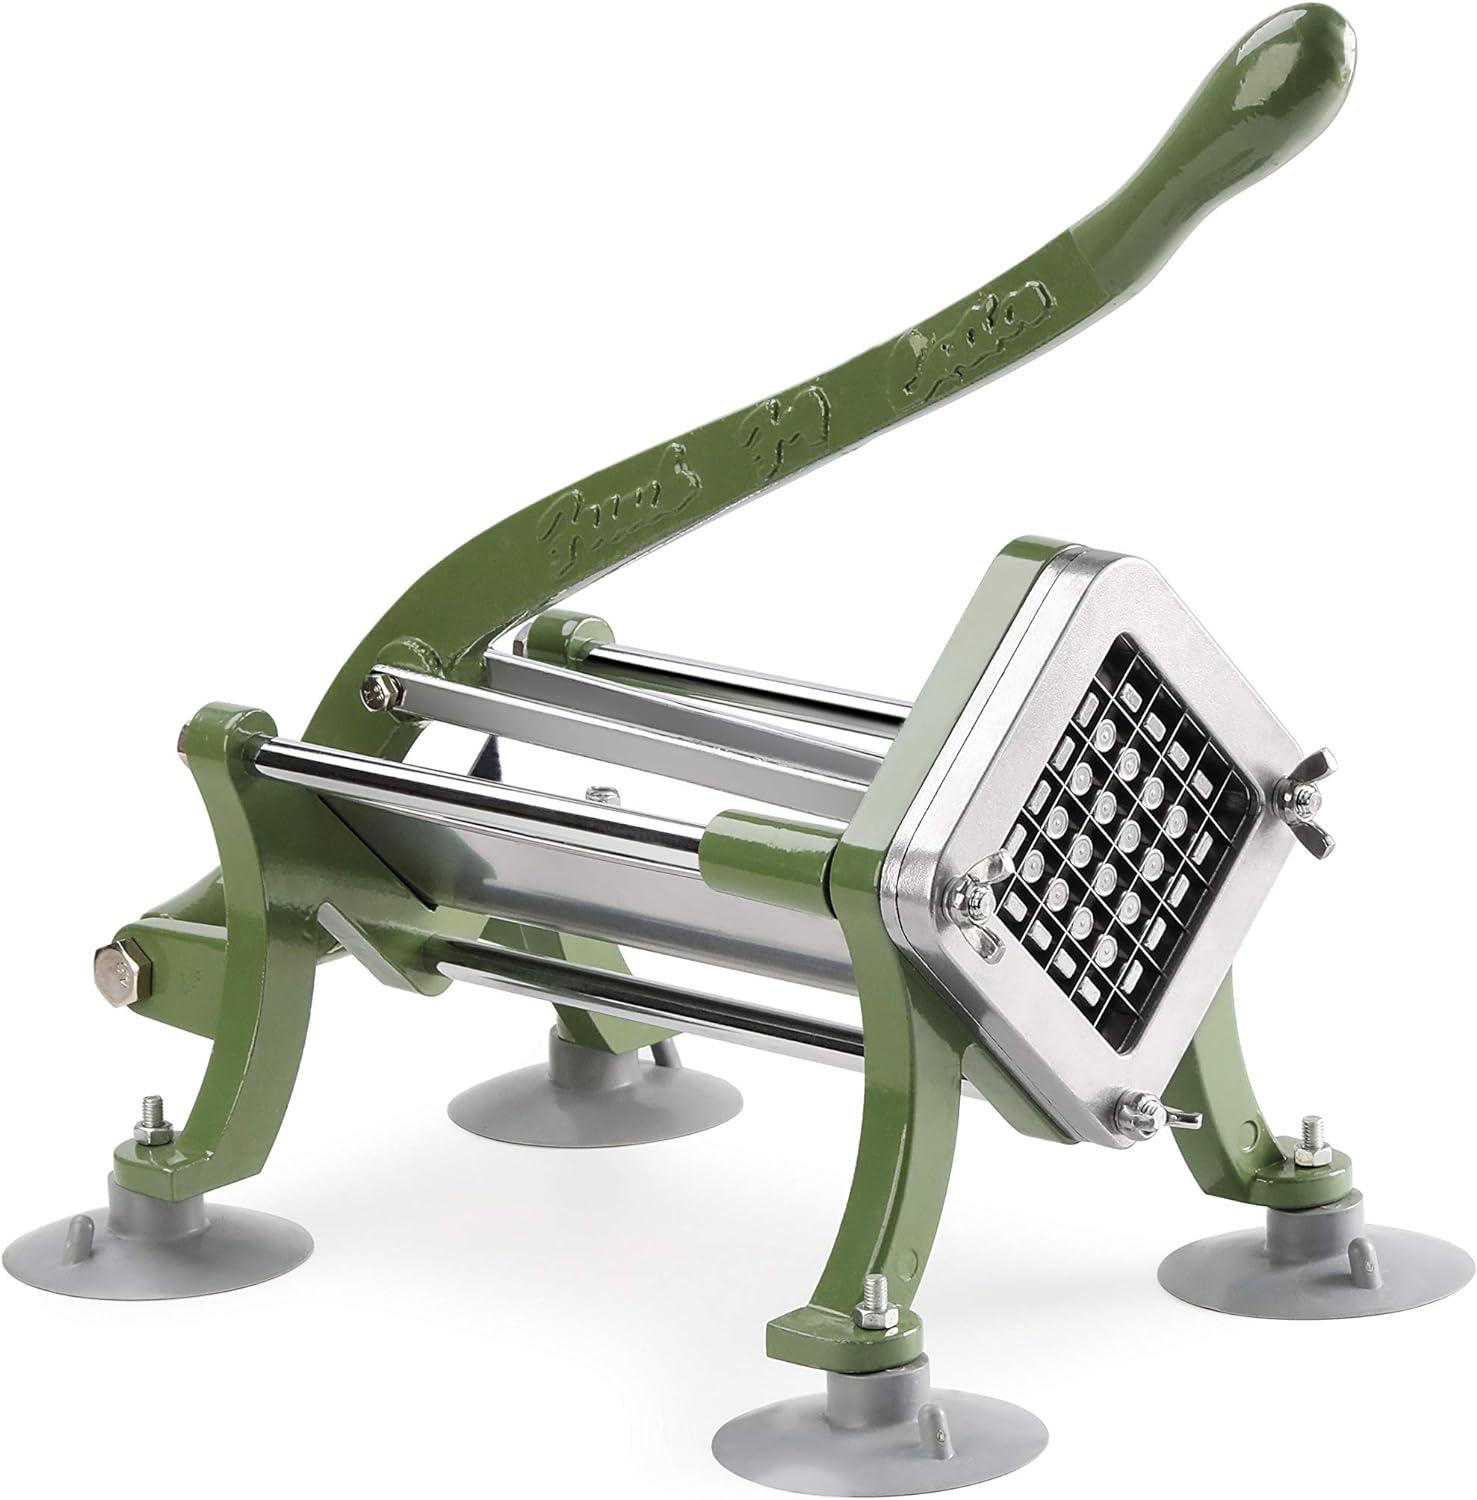 New Star Food Service 42313 Commercial Restaurant French Fry Cutter, 1/2", Retail $100.00